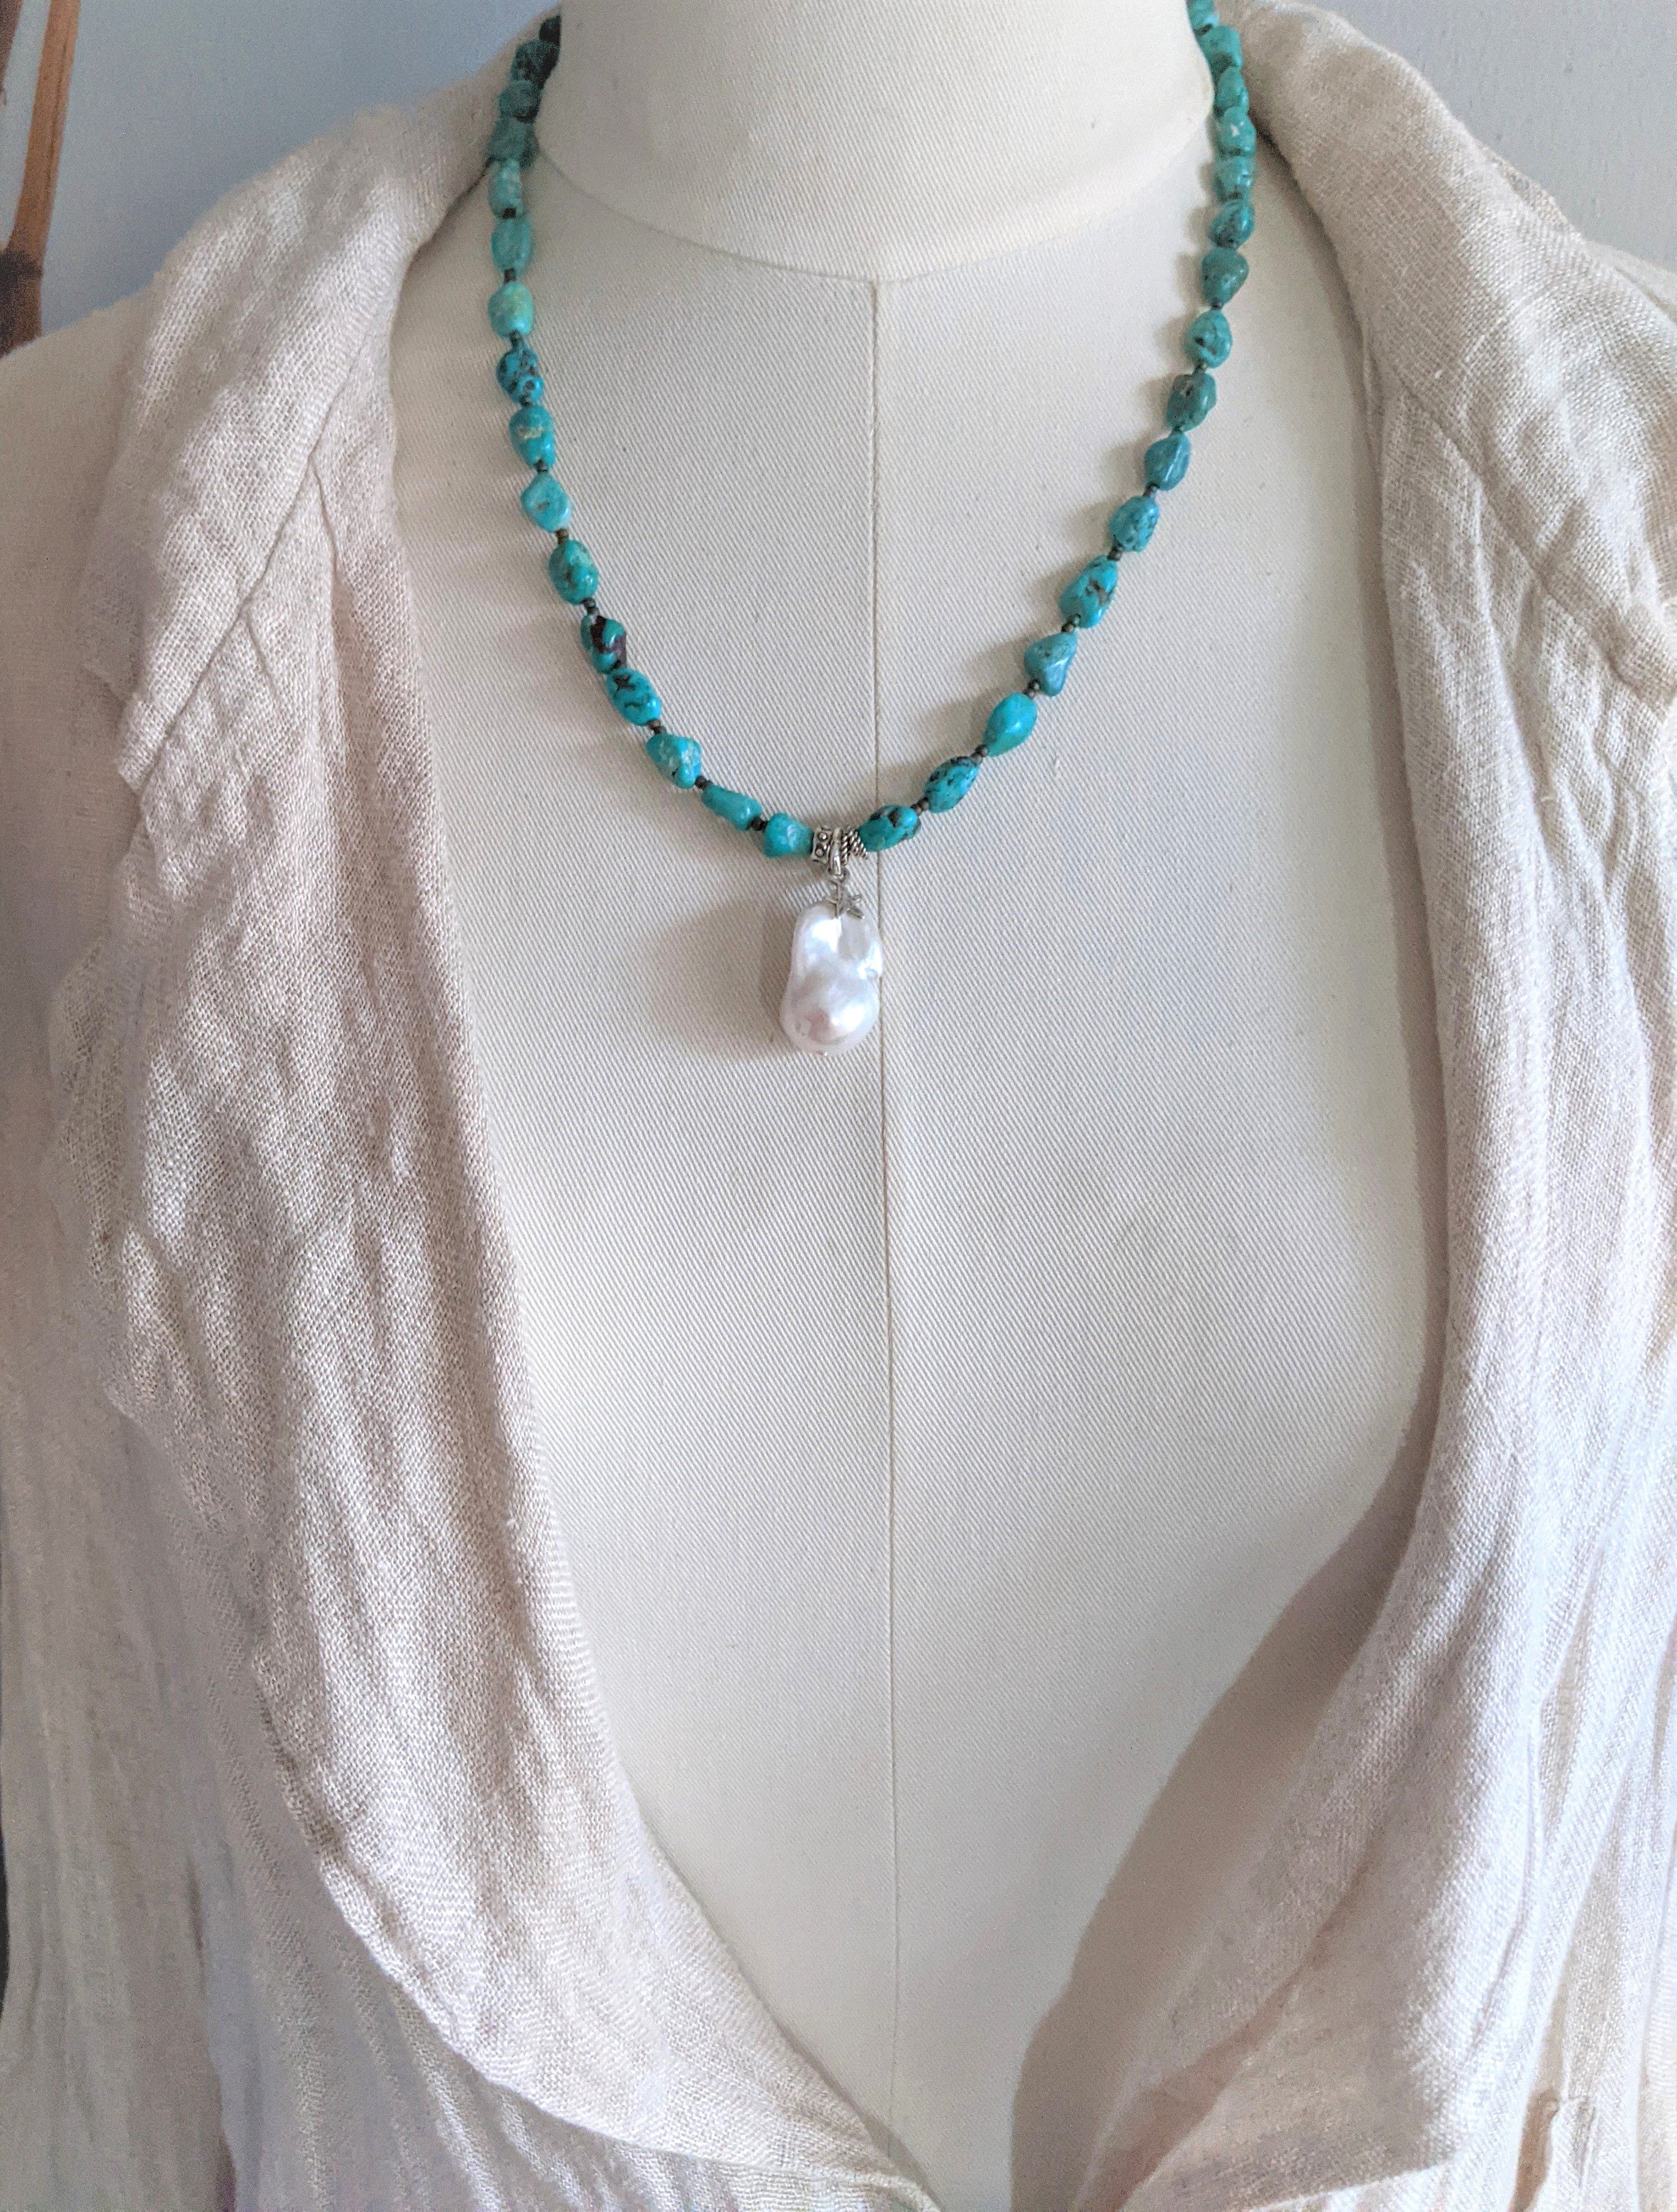 Real turquoise necklace. Bold turquoise necklace. One of a kind necklace. Handcrafted by Aurora Creative Jewellery.